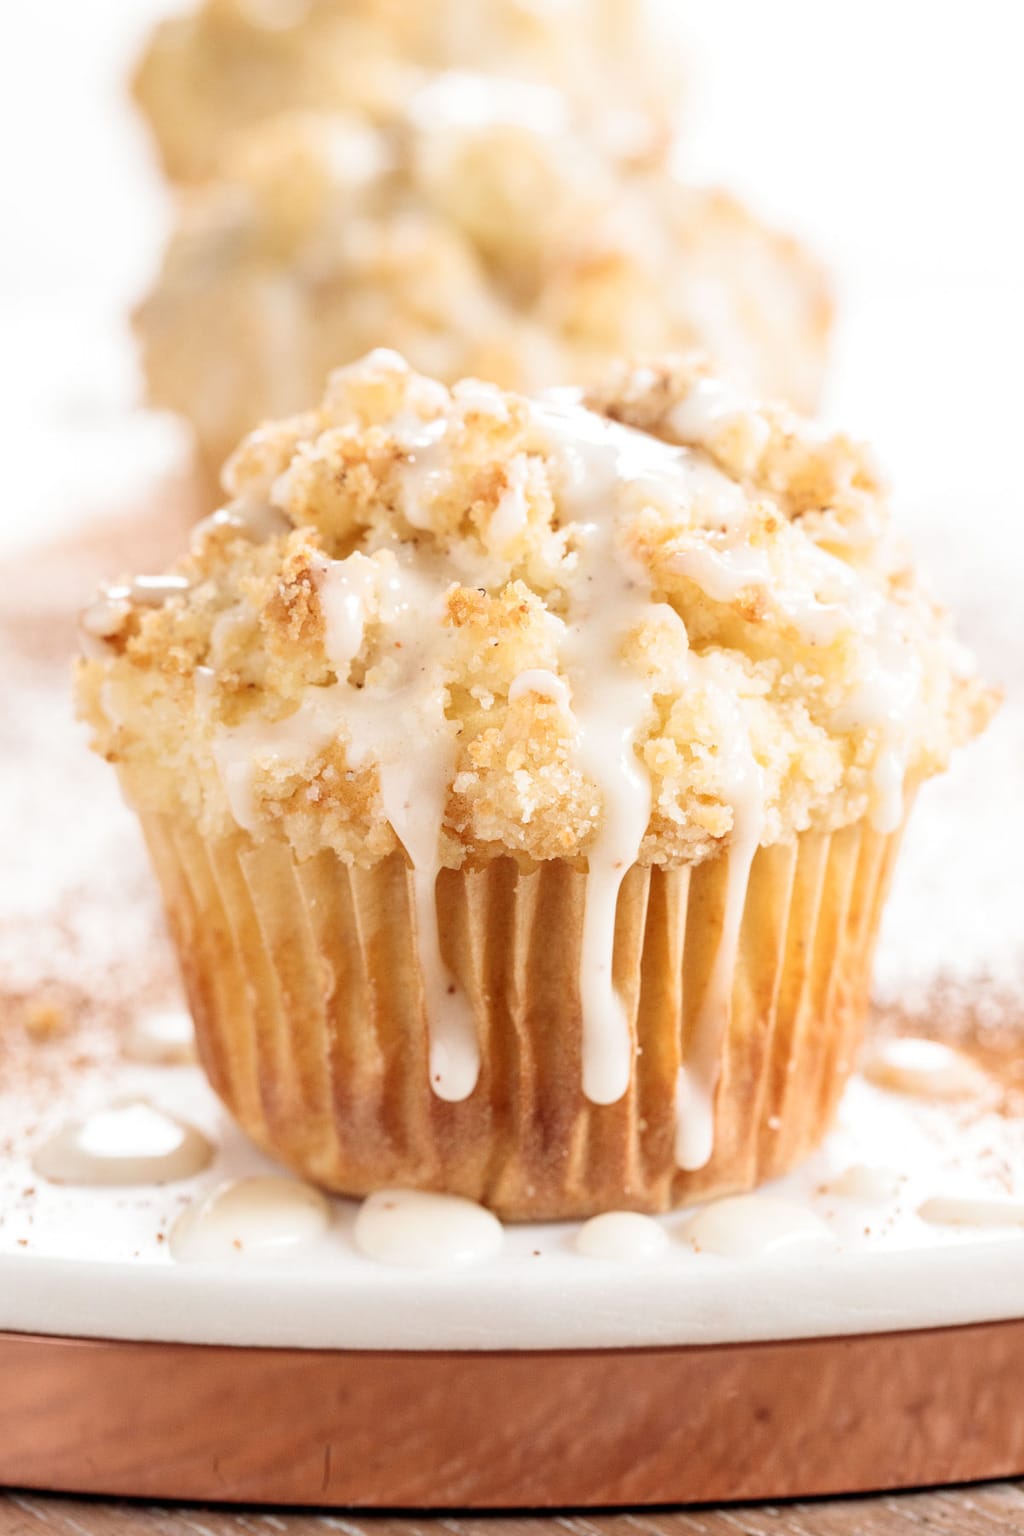 Vertical extreme closeup photo of a Eggnog Crumble Muffin on a white marble surface with icing drizzled down the sides.